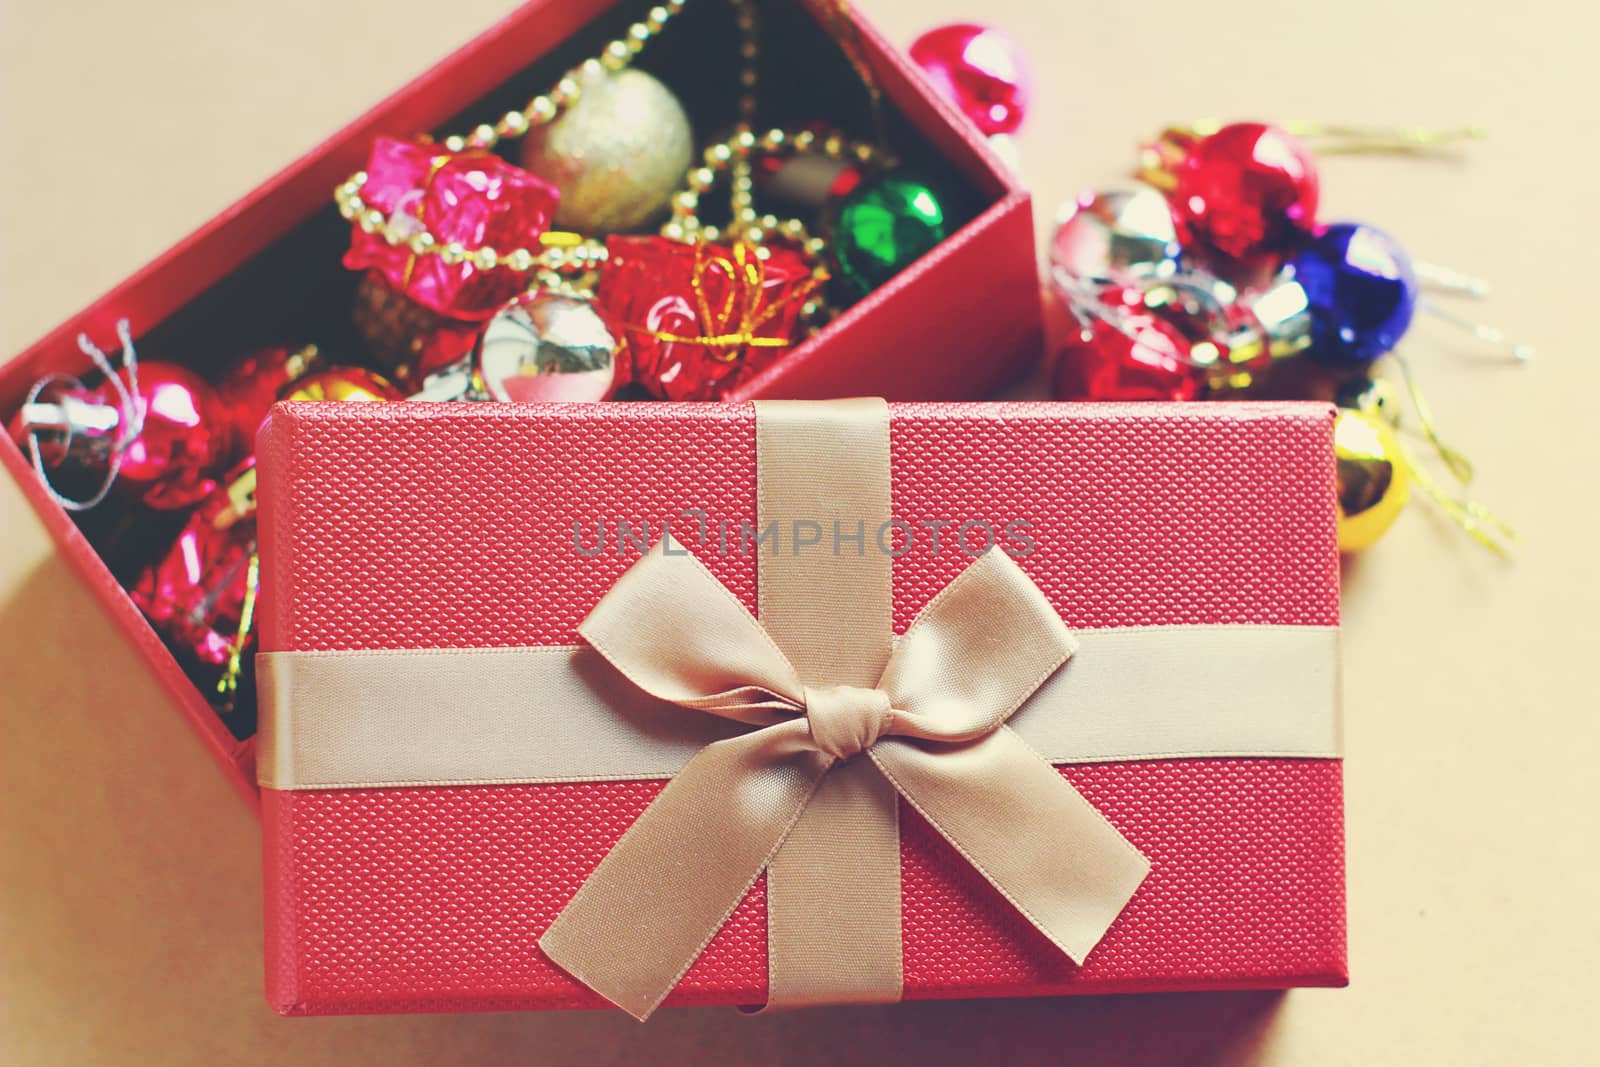 Gift red box contain with christmas ornament, retro filter effec by nuchylee